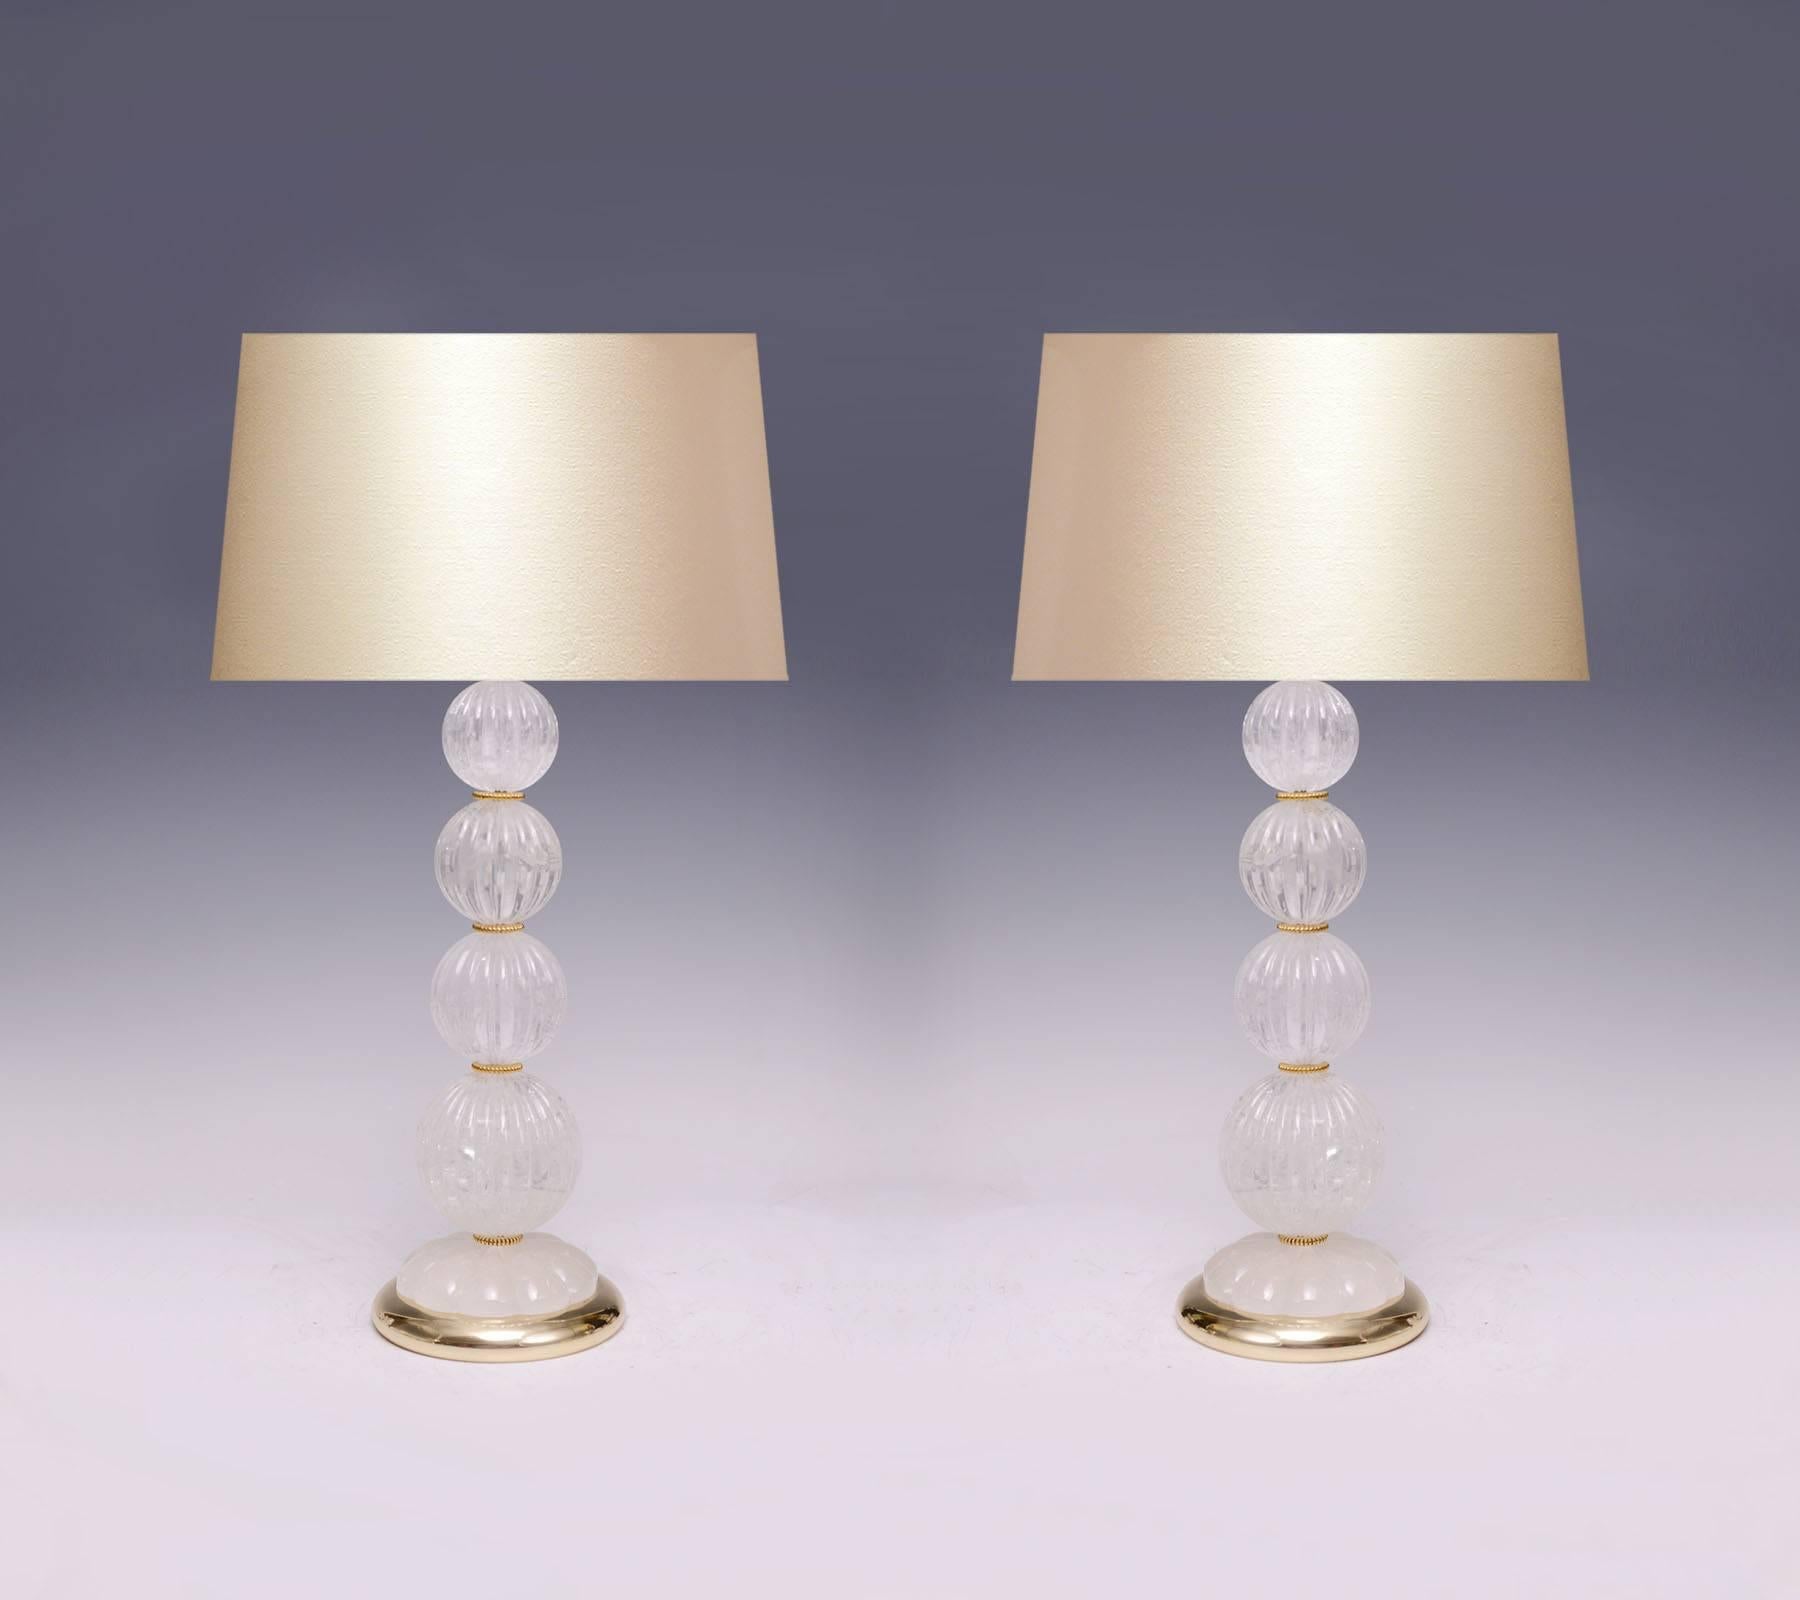 A pair of contemporary rock crystal quartz lamps with a group of fine carved notch balls and polish brass base, created by Phoenix gallery, New York City.
Measure: To the top of the rock crystal: 17